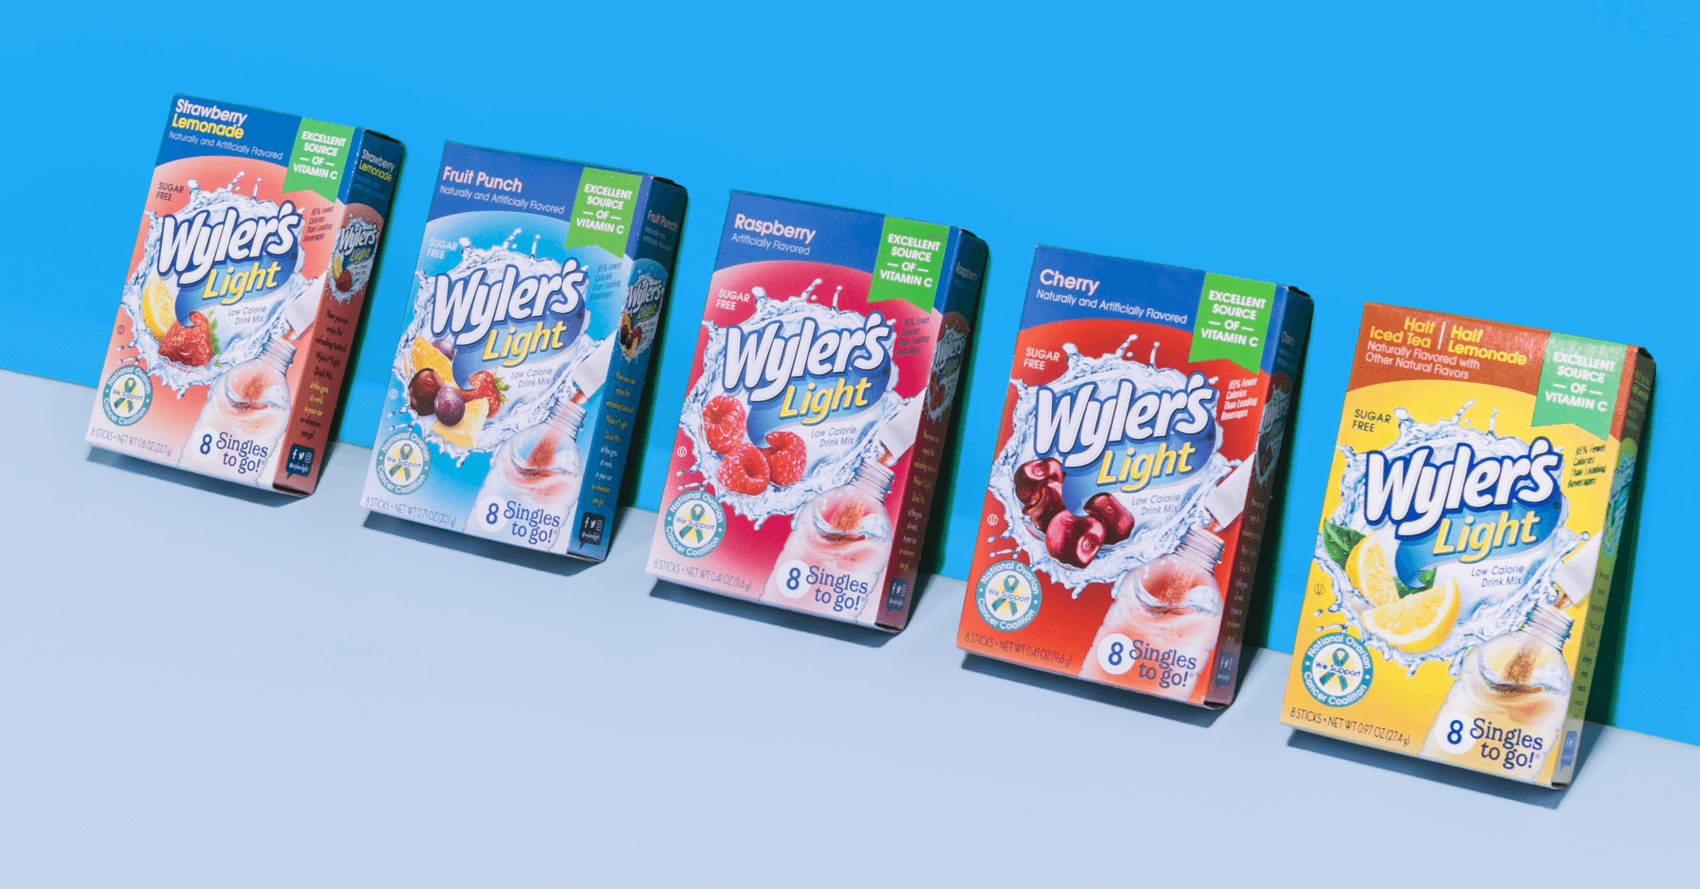 Wyler's singles to go boxes, Singles to go water flavor packets, sugar free water flavor packets